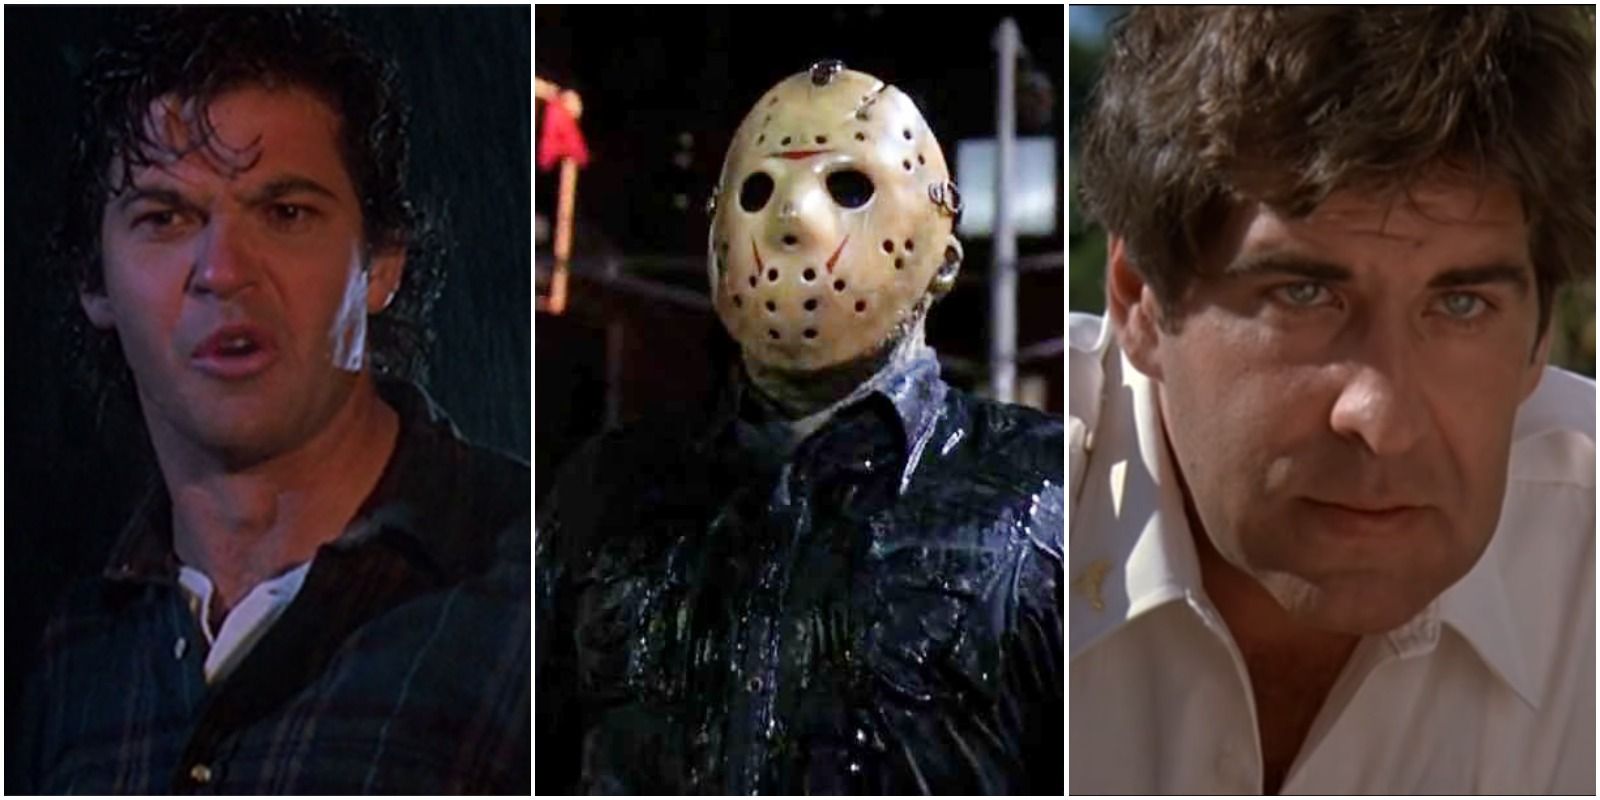 Friday The 13th 5 Moments From The Franchise That Are So Bad Theyre Hilarious (& 5 That Are Just Plain Bad)